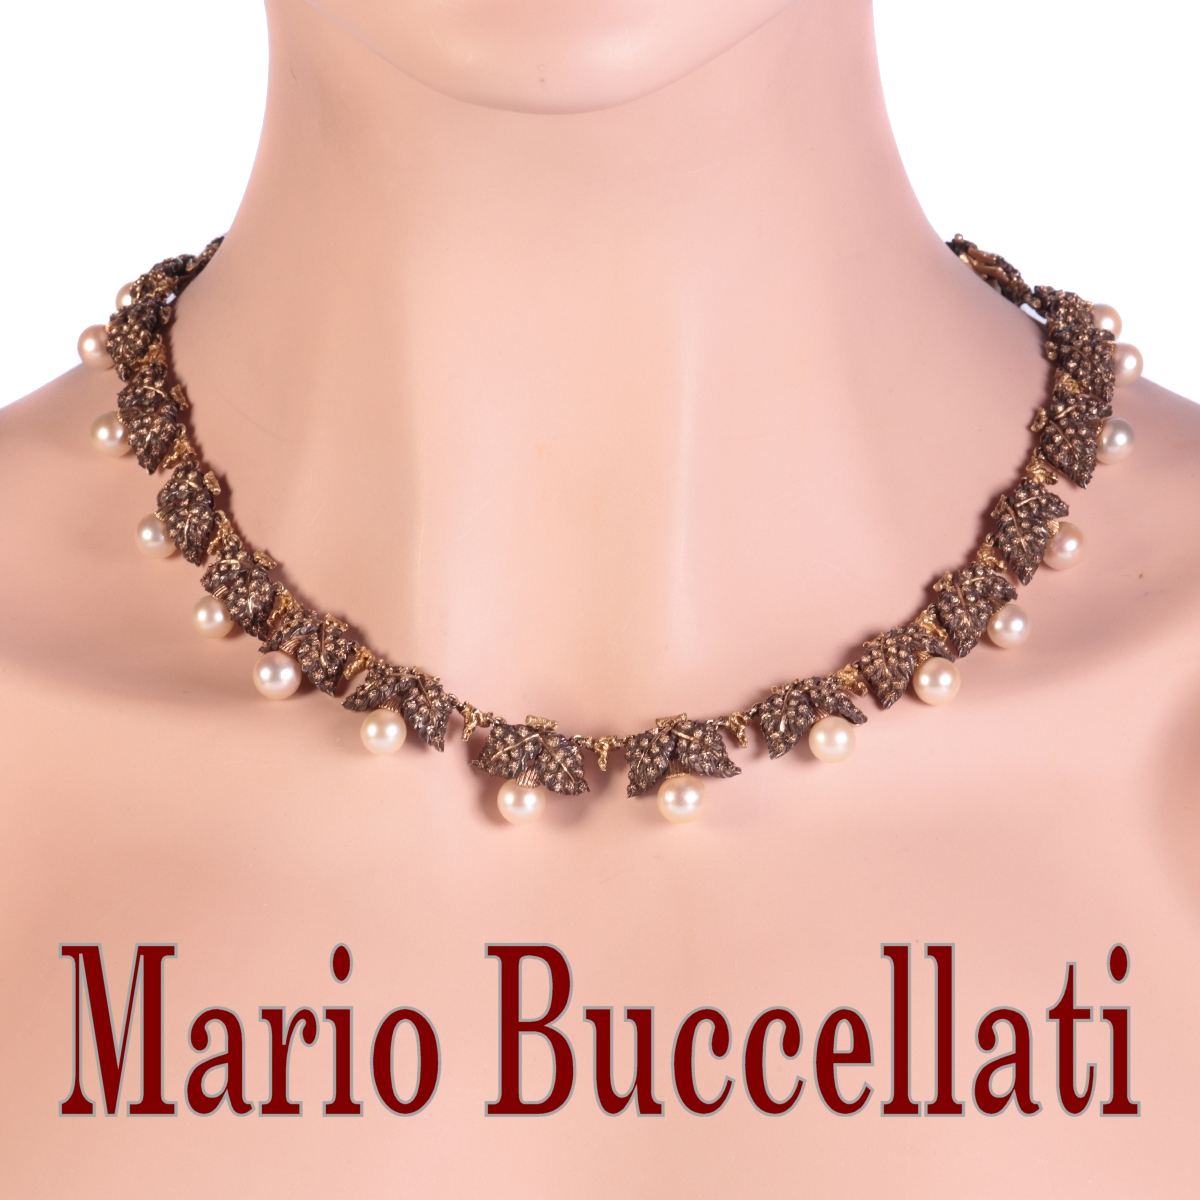 Mario Buccellati Vintage Fifties gold and silver pearl neck jewel necklace with grape leaf motive